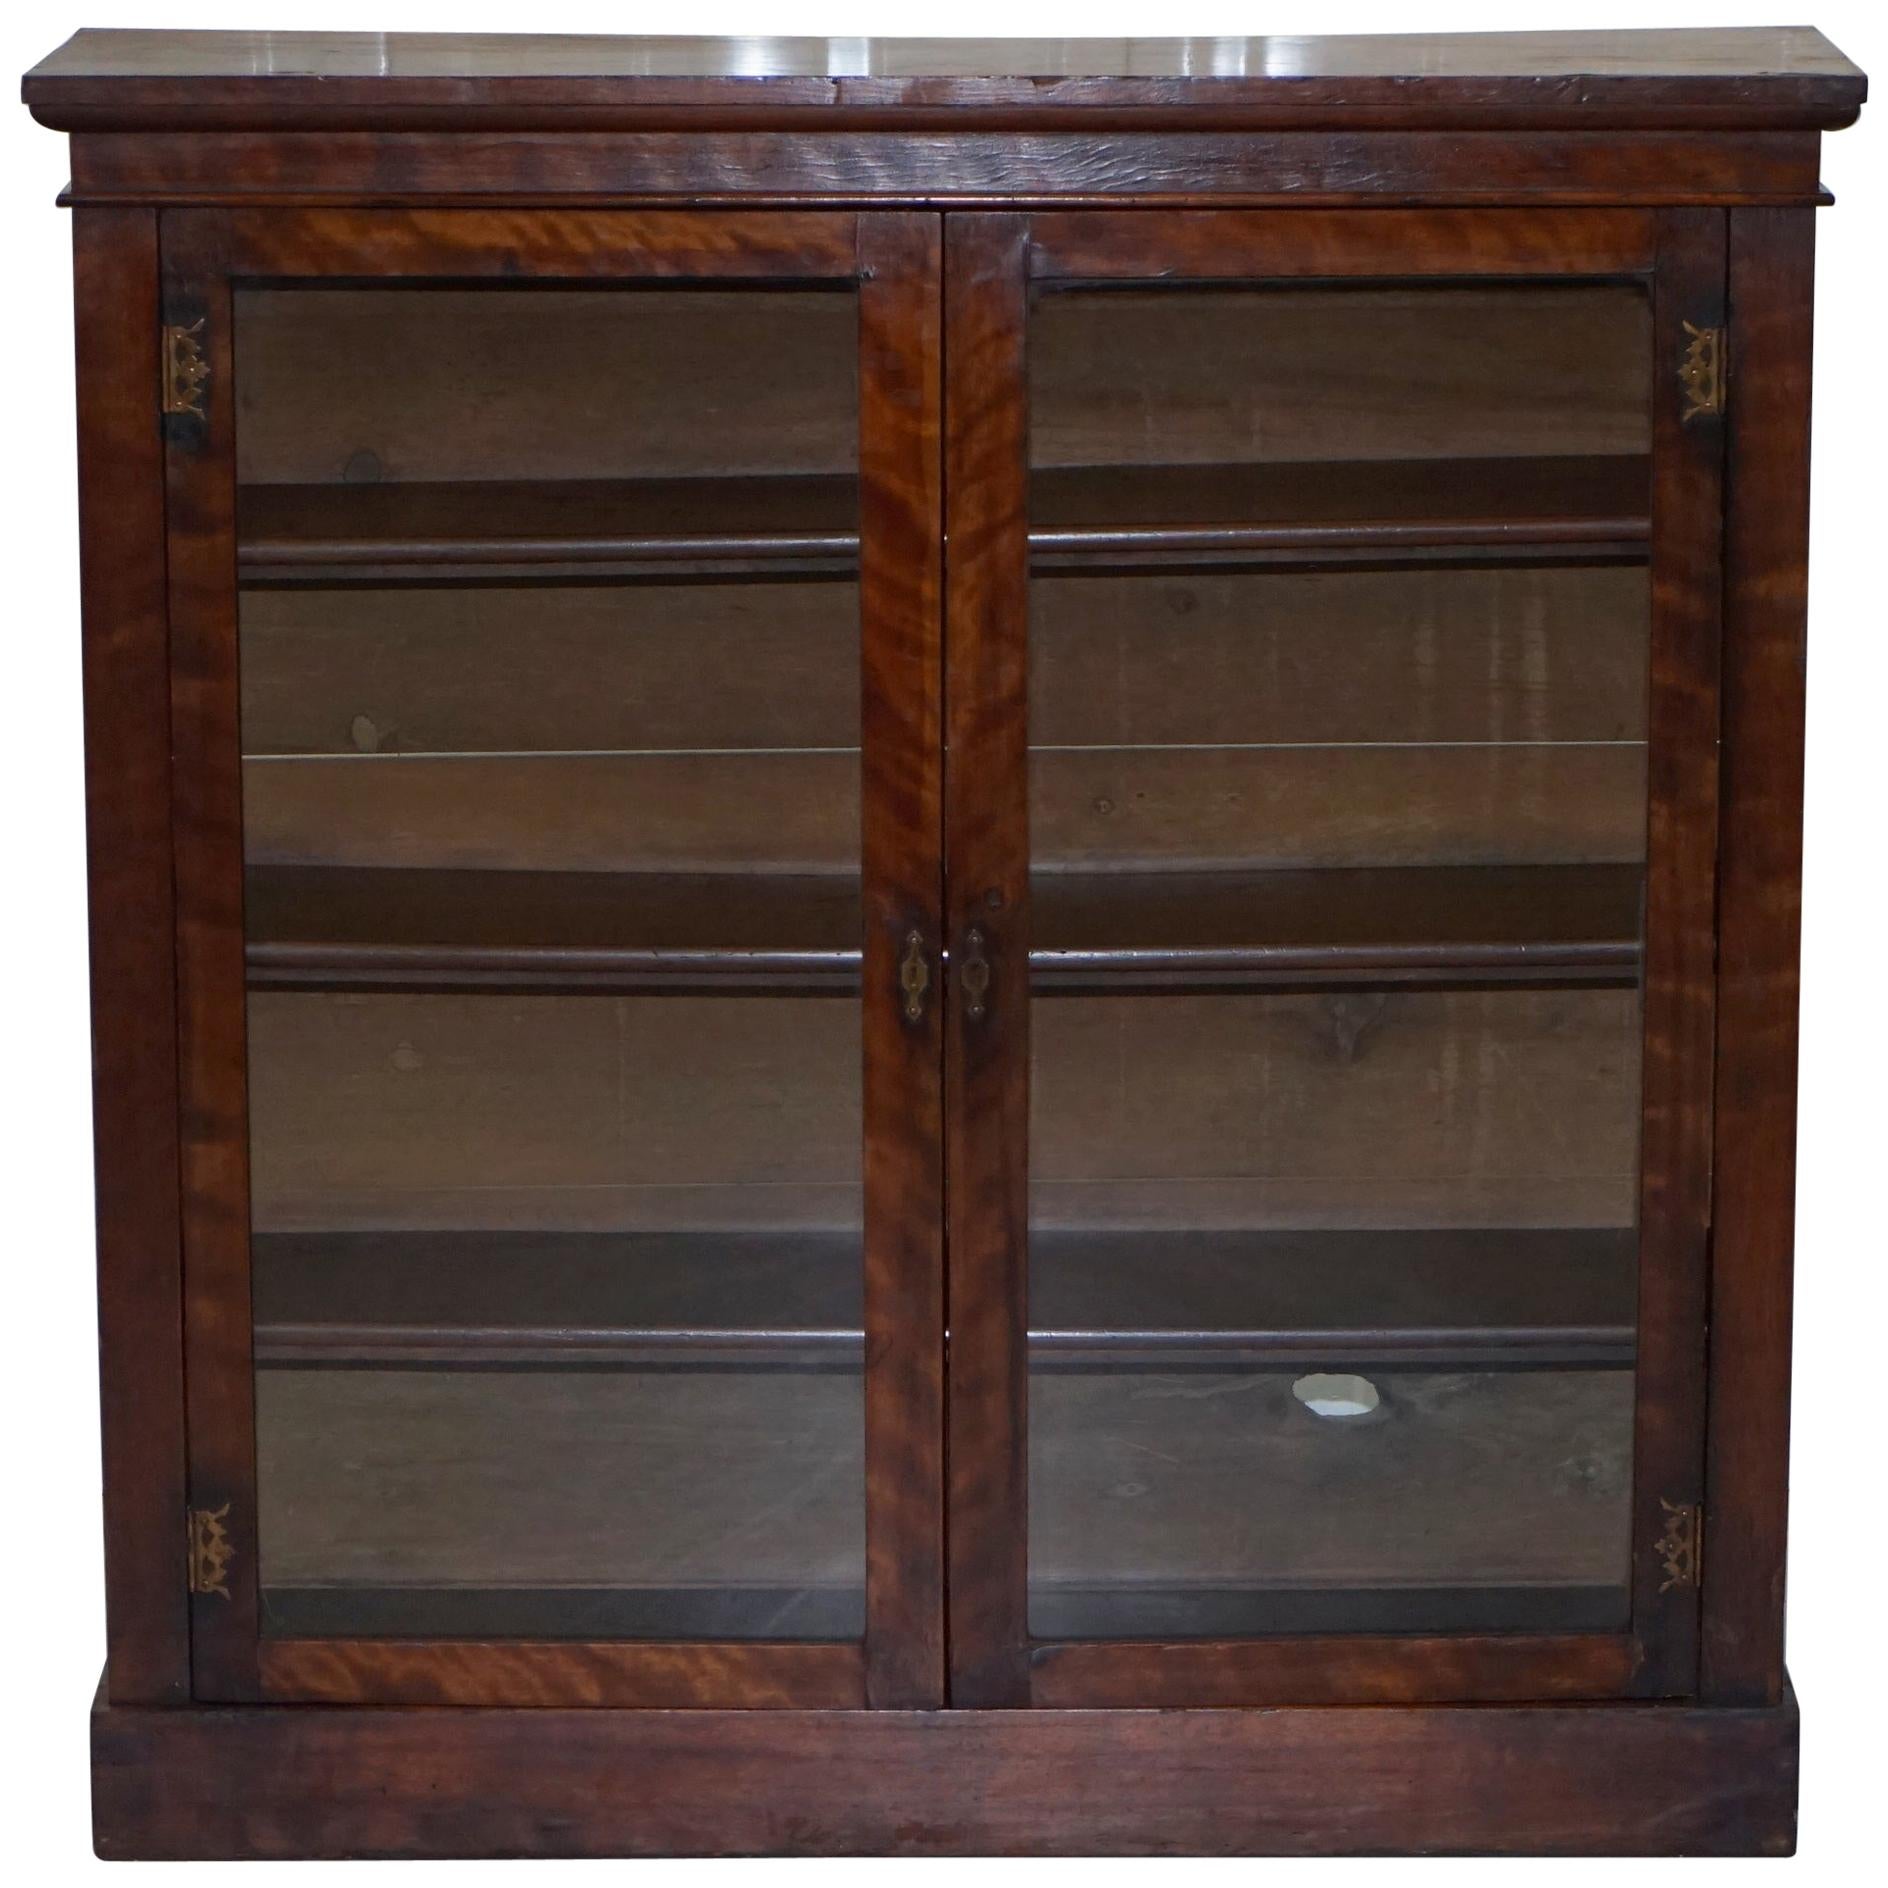 Victorian Library Bookcase in Mahogany with Glazed Doors